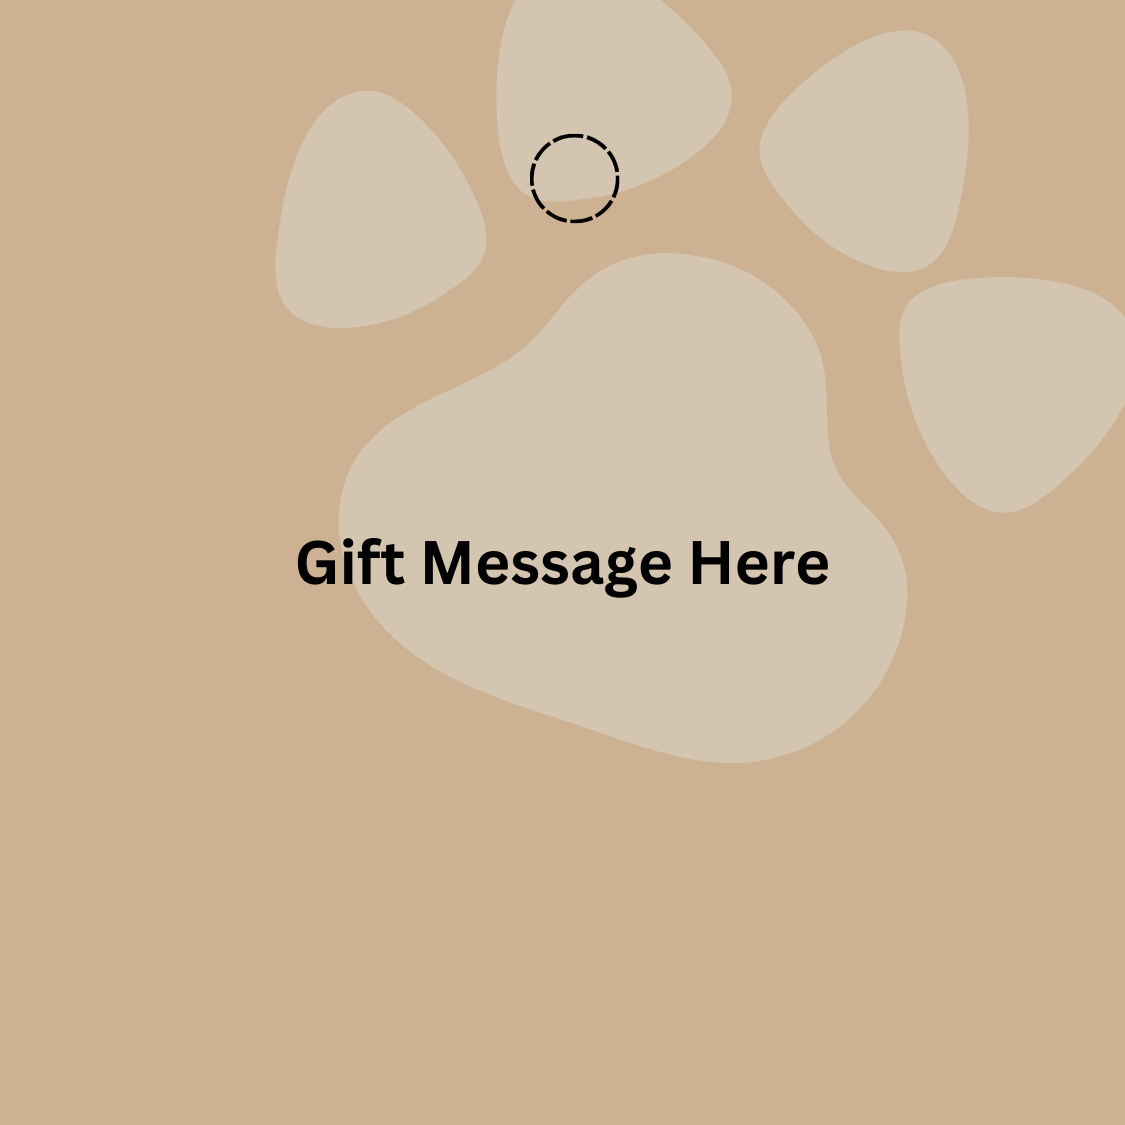 gift message example available to include in any gift